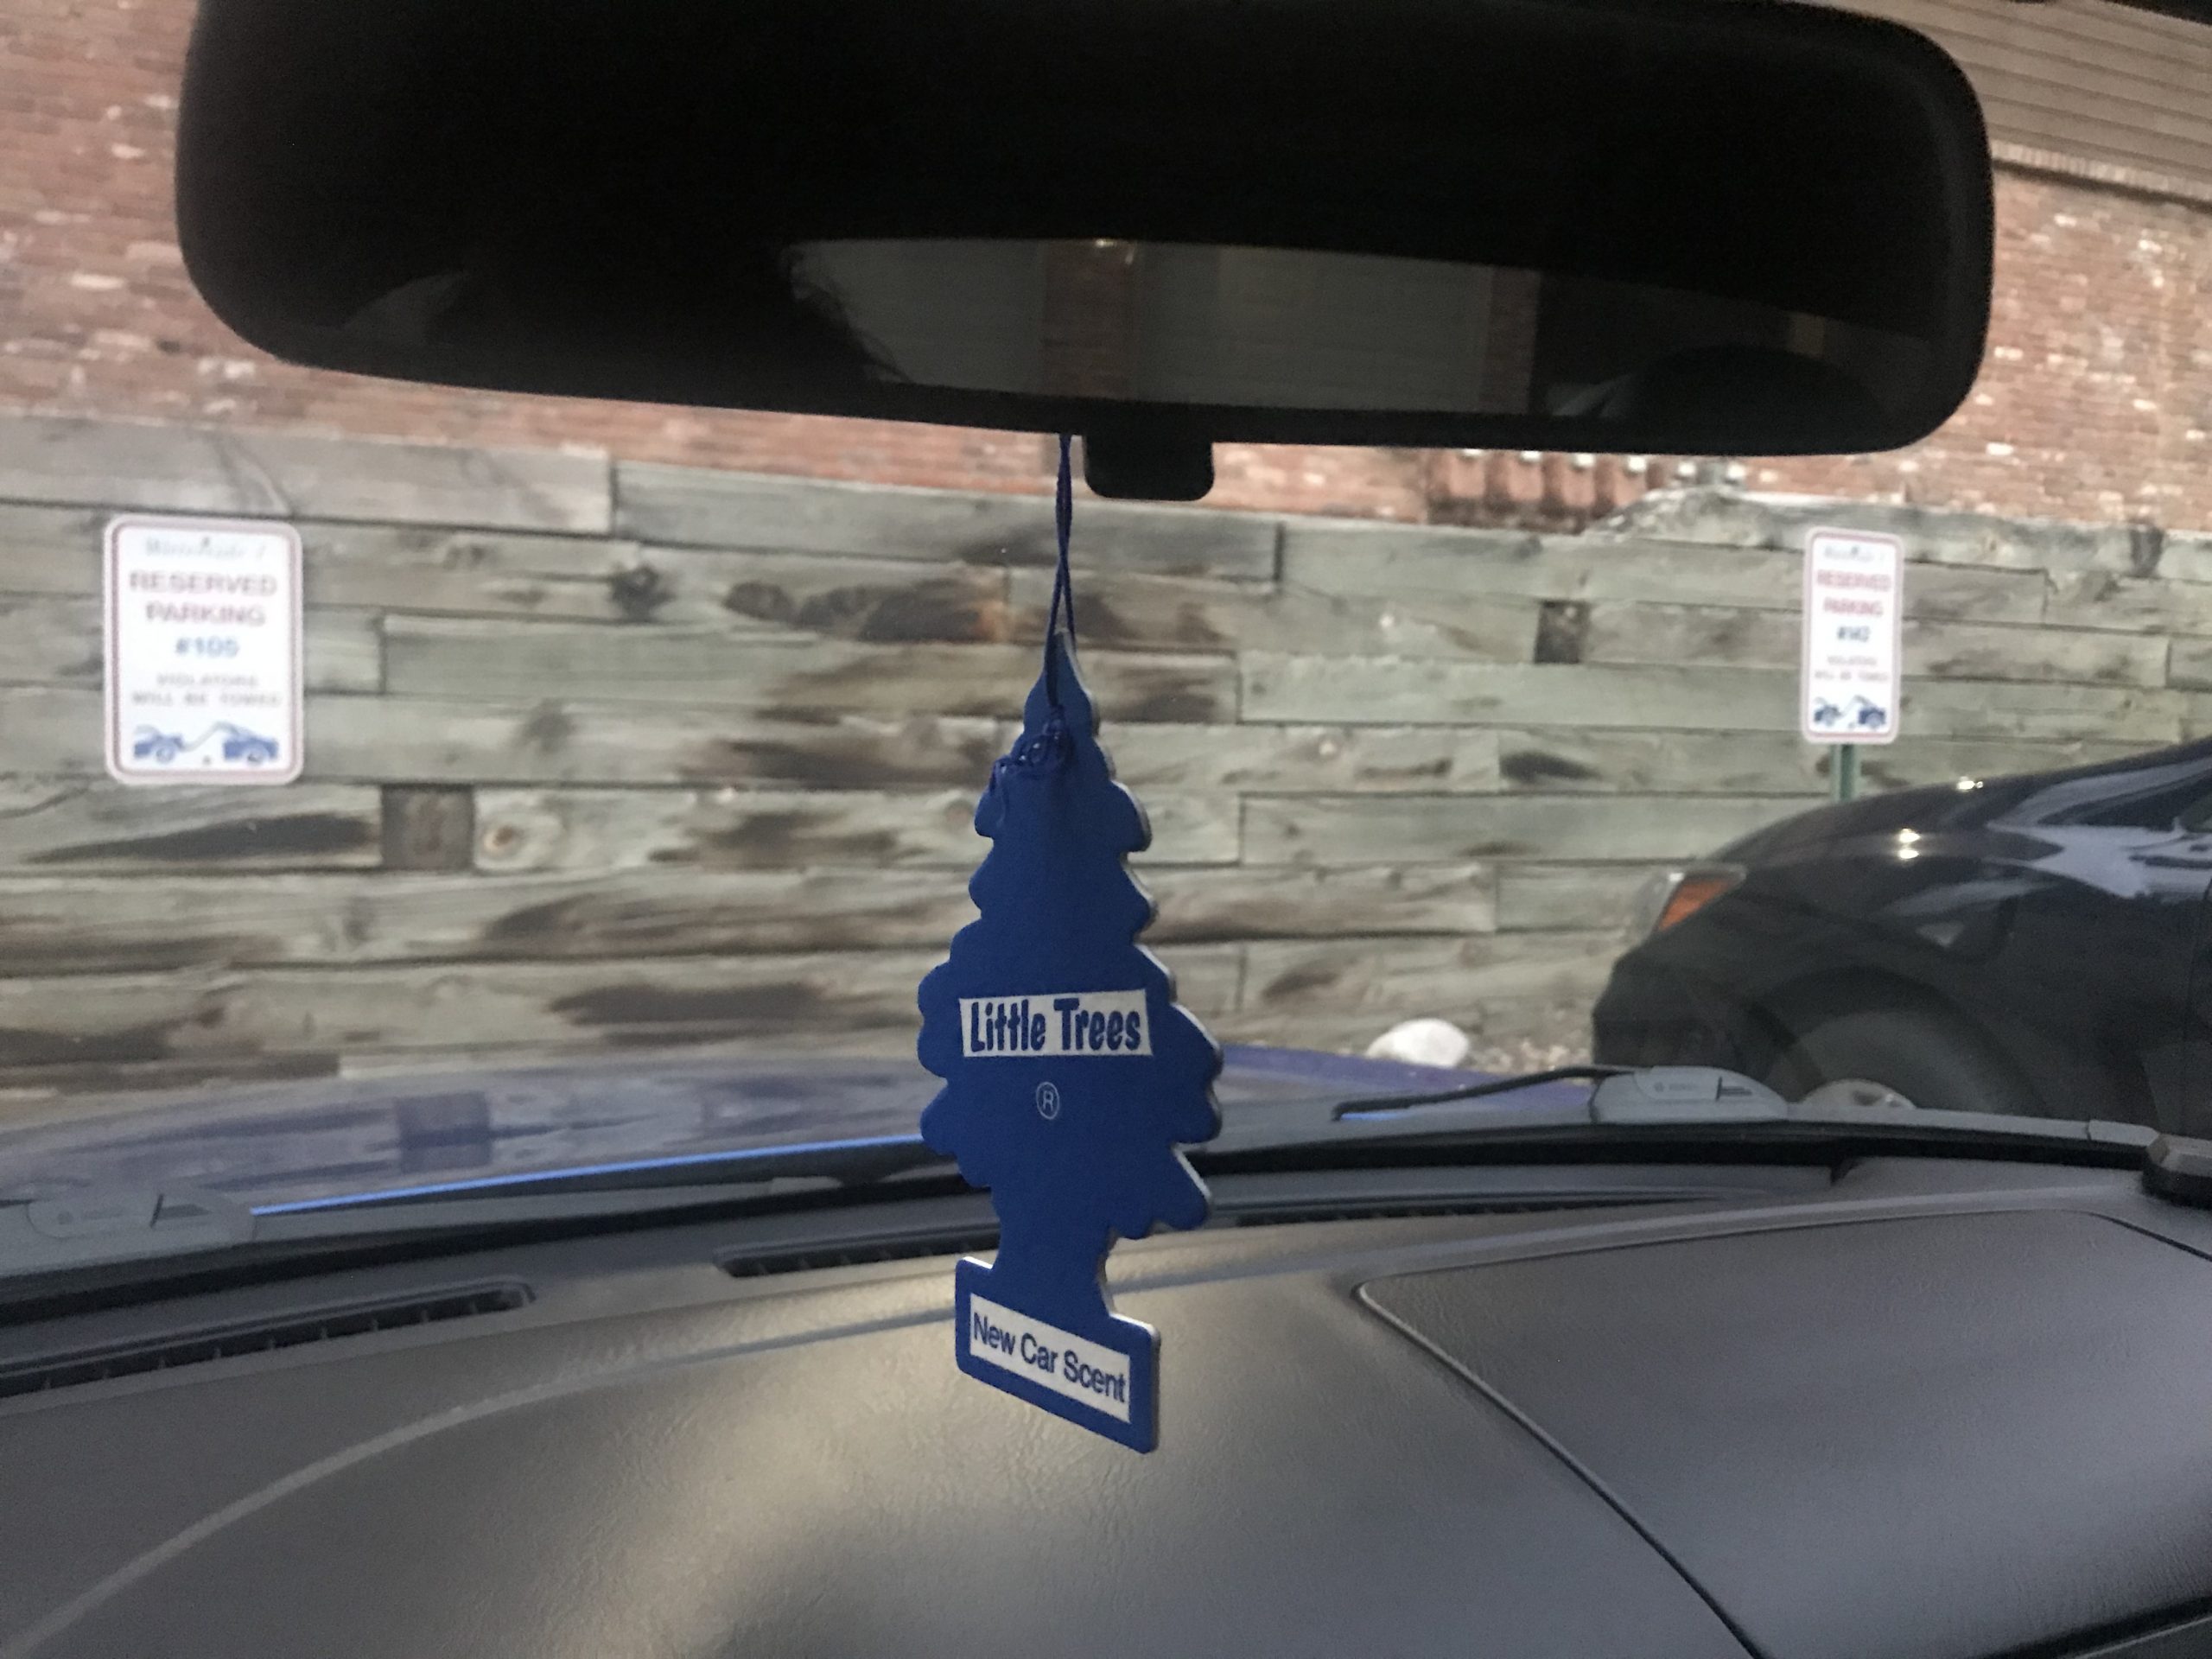 Little Tree air freshener hanging from a mirror